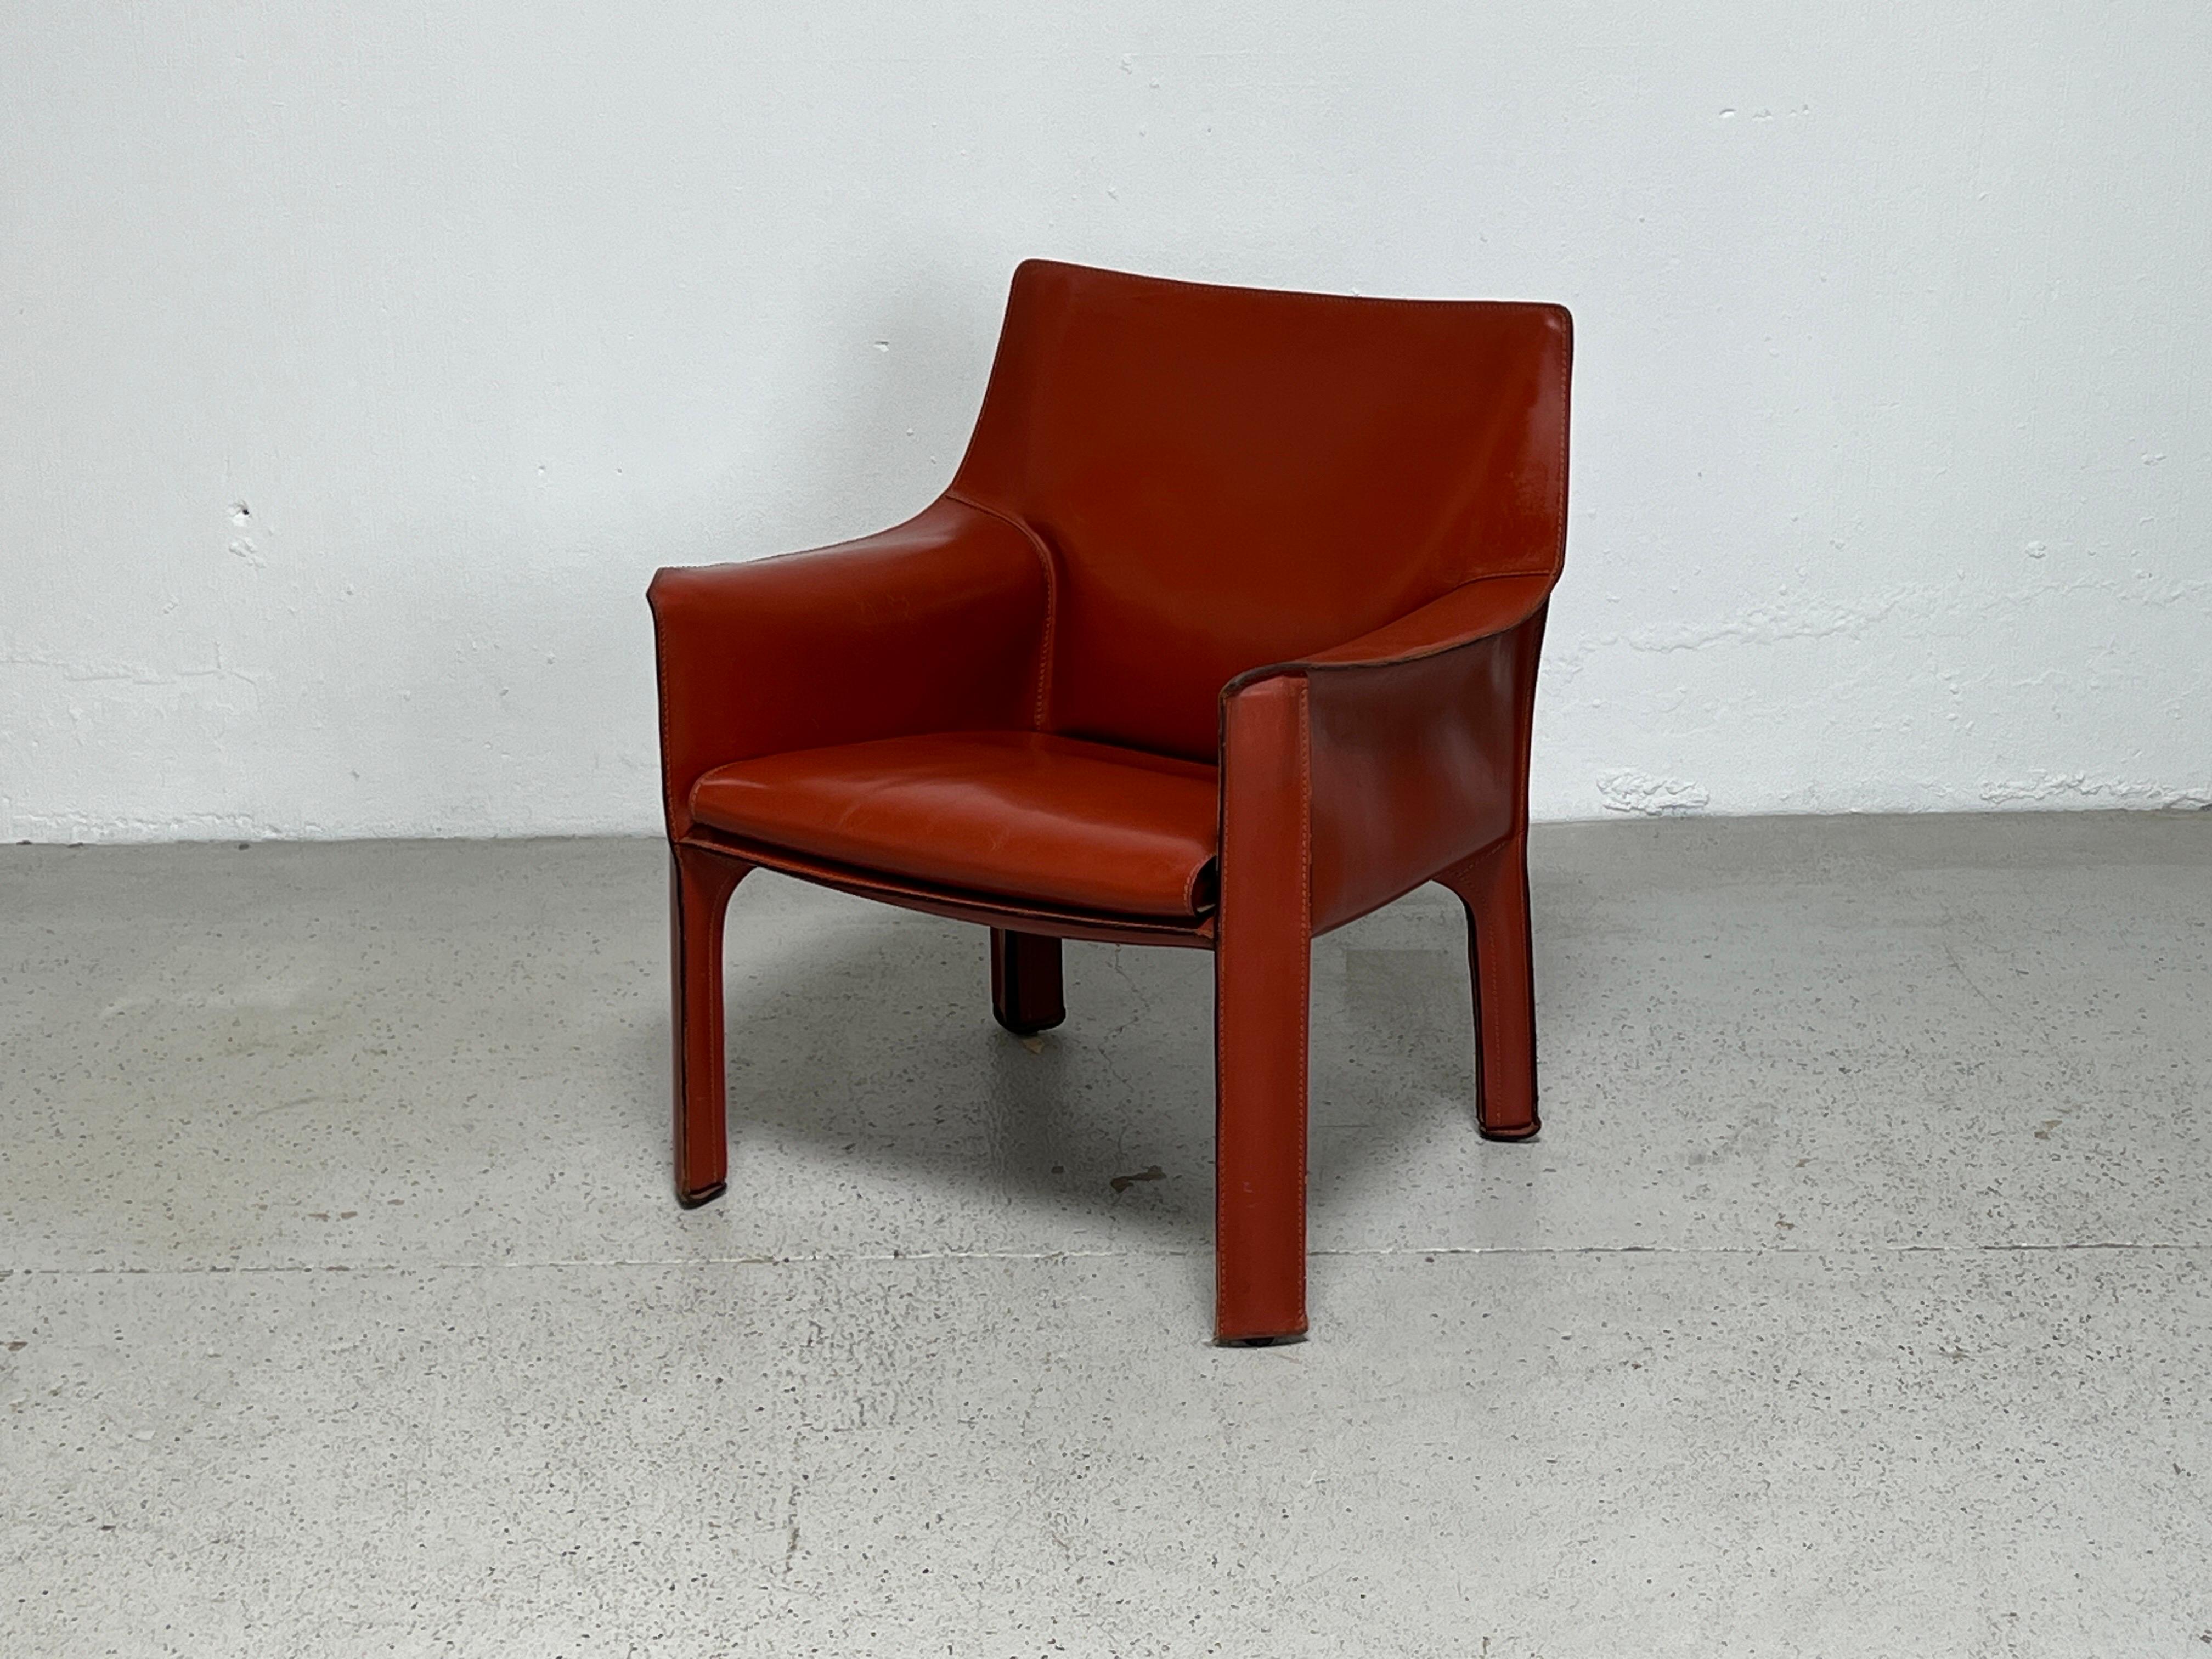 Mario Bellini for Cassina Cab 414 lounge chair in China red/Oxblood leather. 